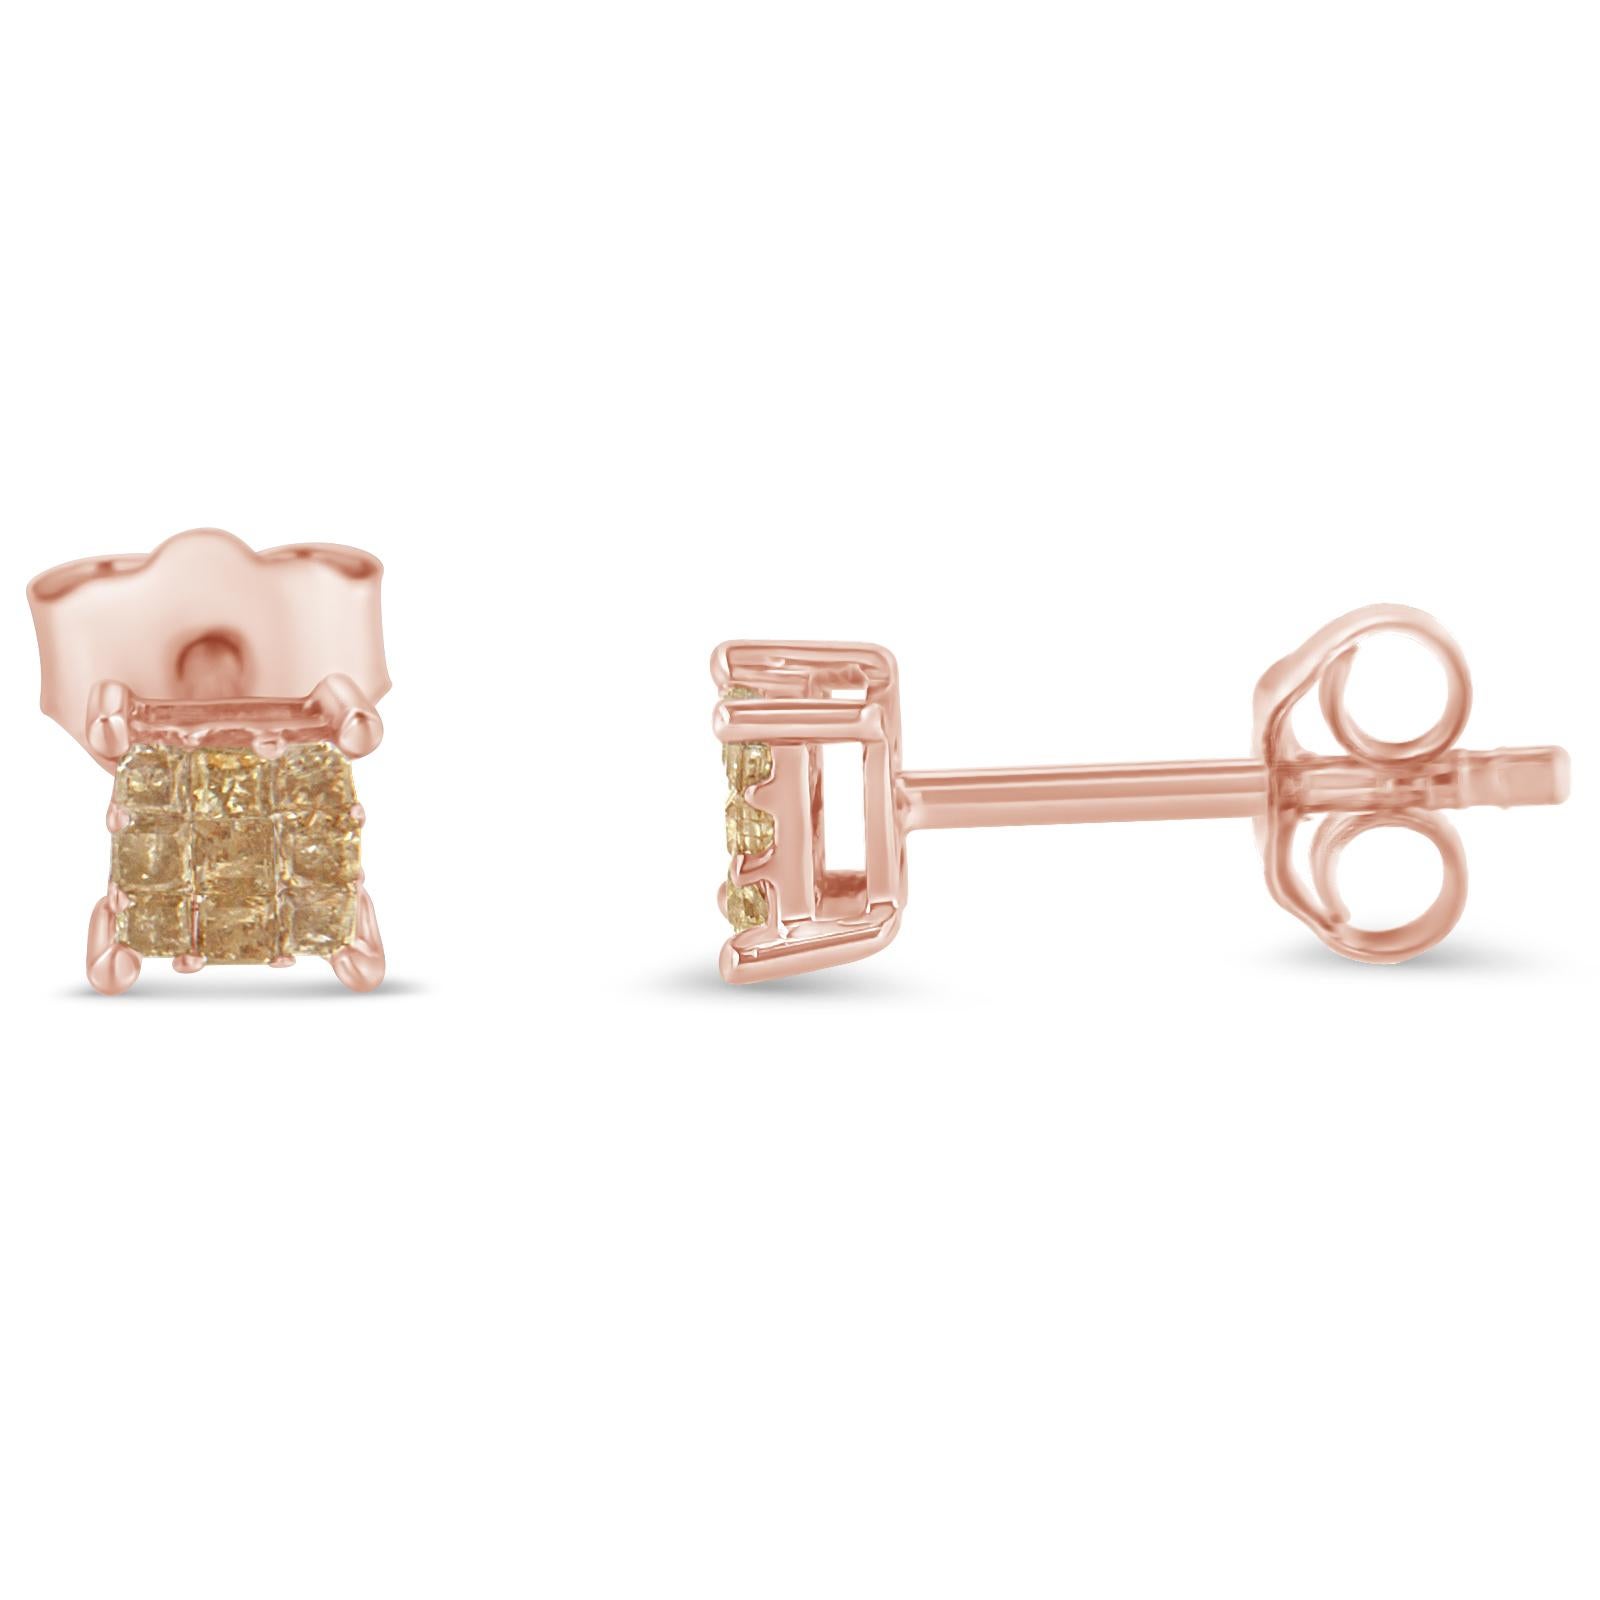 Rose tinted metals and stones are all the rage. Indulge in the trend with these 0.25 carat princess cut diamond stud earrings. The champagne colored stones perfectly compliment the rose colored sterling silver setting for a fashionable look.

